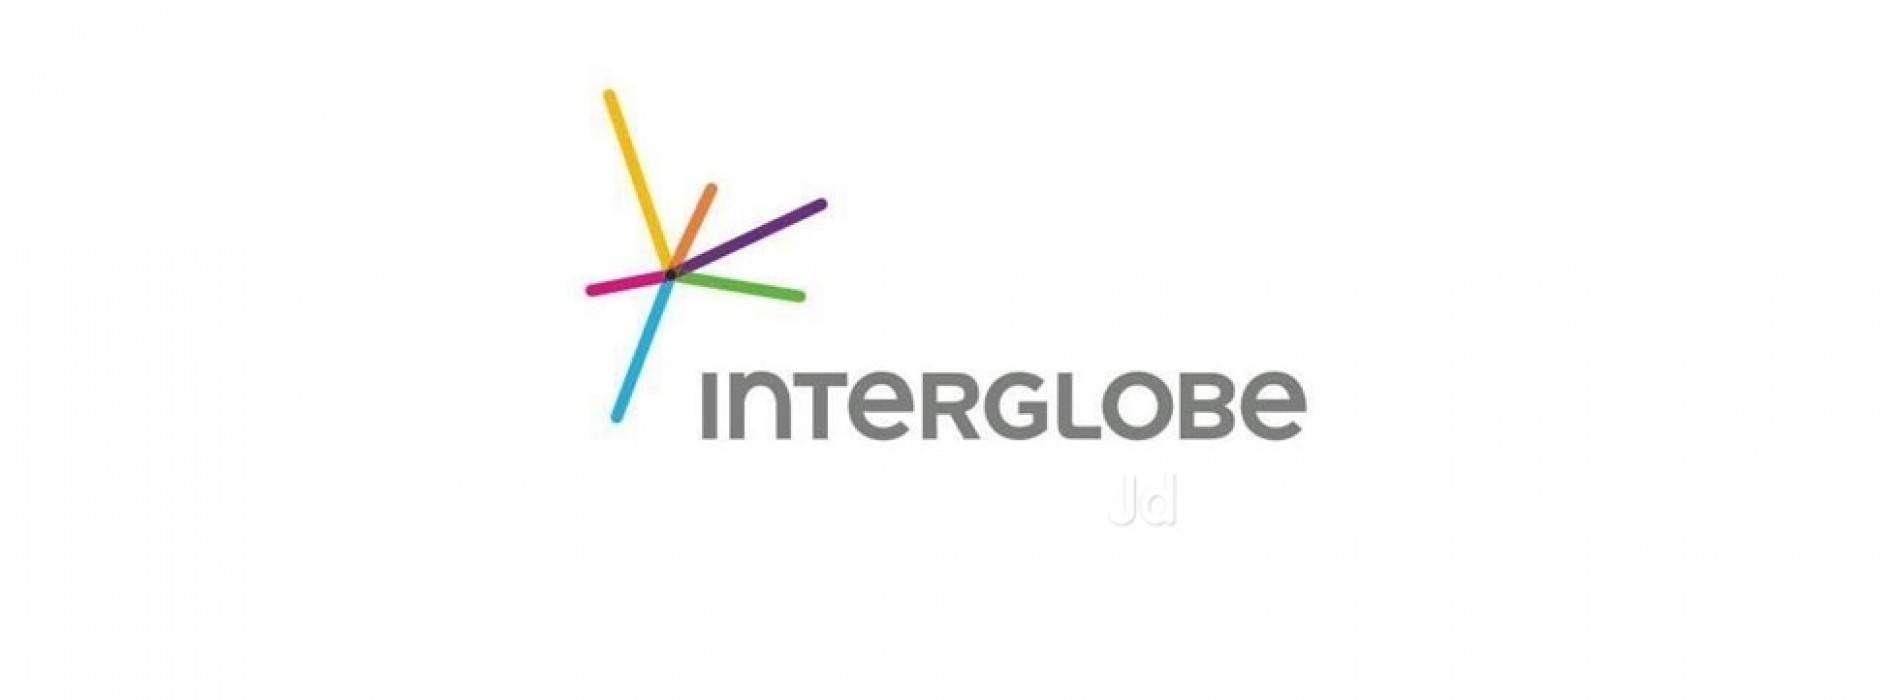 InterGlobe promoters to sell shares worth Rs. 1,245 crore